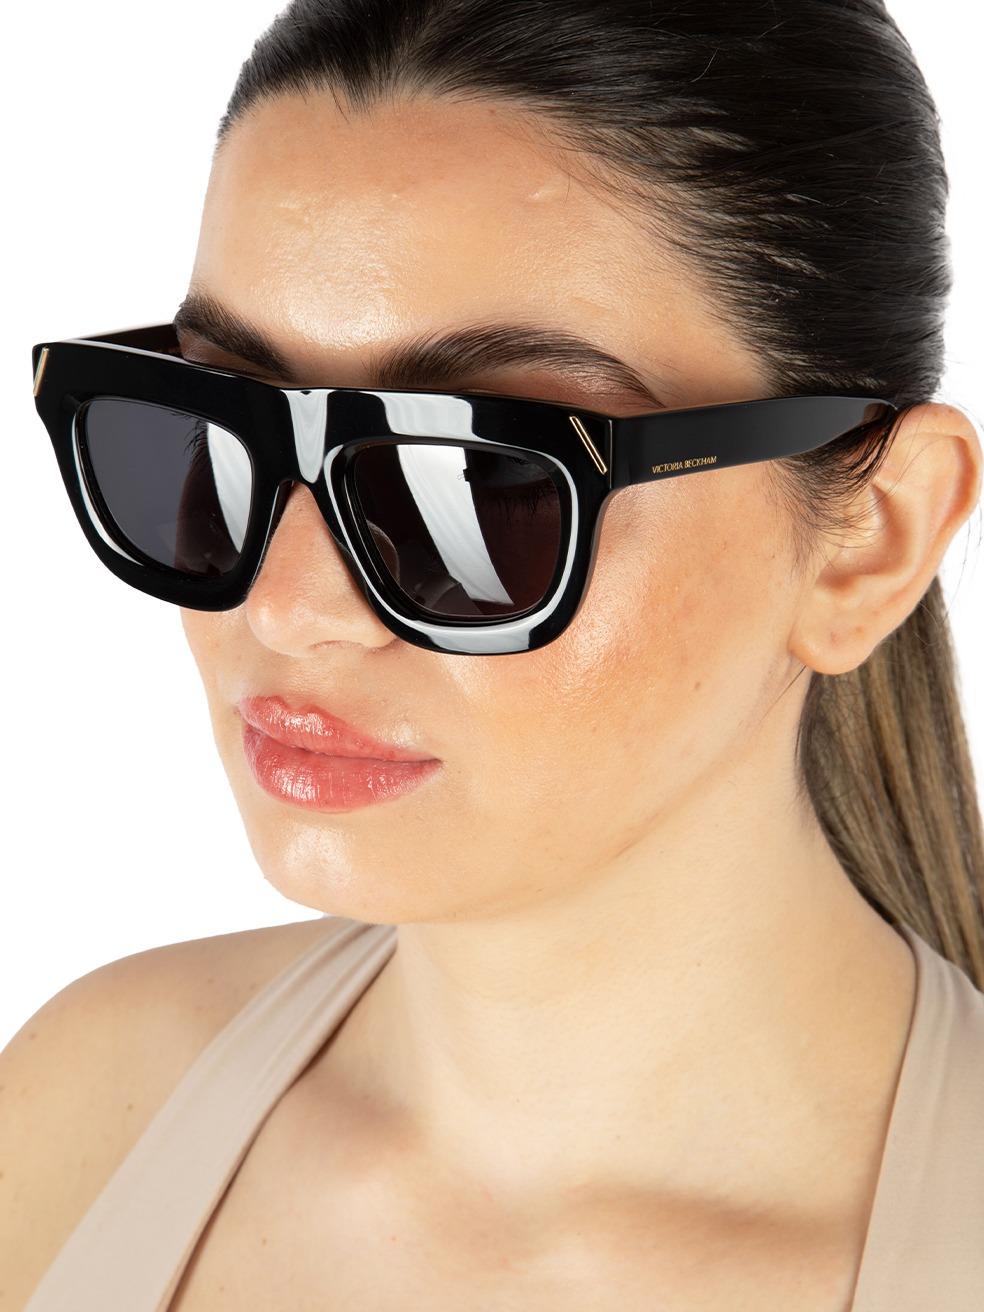 CONDITION is New with tags on this brand new Victoria Beckhamdesigner item. This item comes with original packaging.
 
 
 
 Details
 
 
 Model: VB642S
 
 Black
 
 Acetate
 
 Browline Sunglasses
 
 Grey Tinted Lens
 
 Full-Rim
 
 100% UV protection
